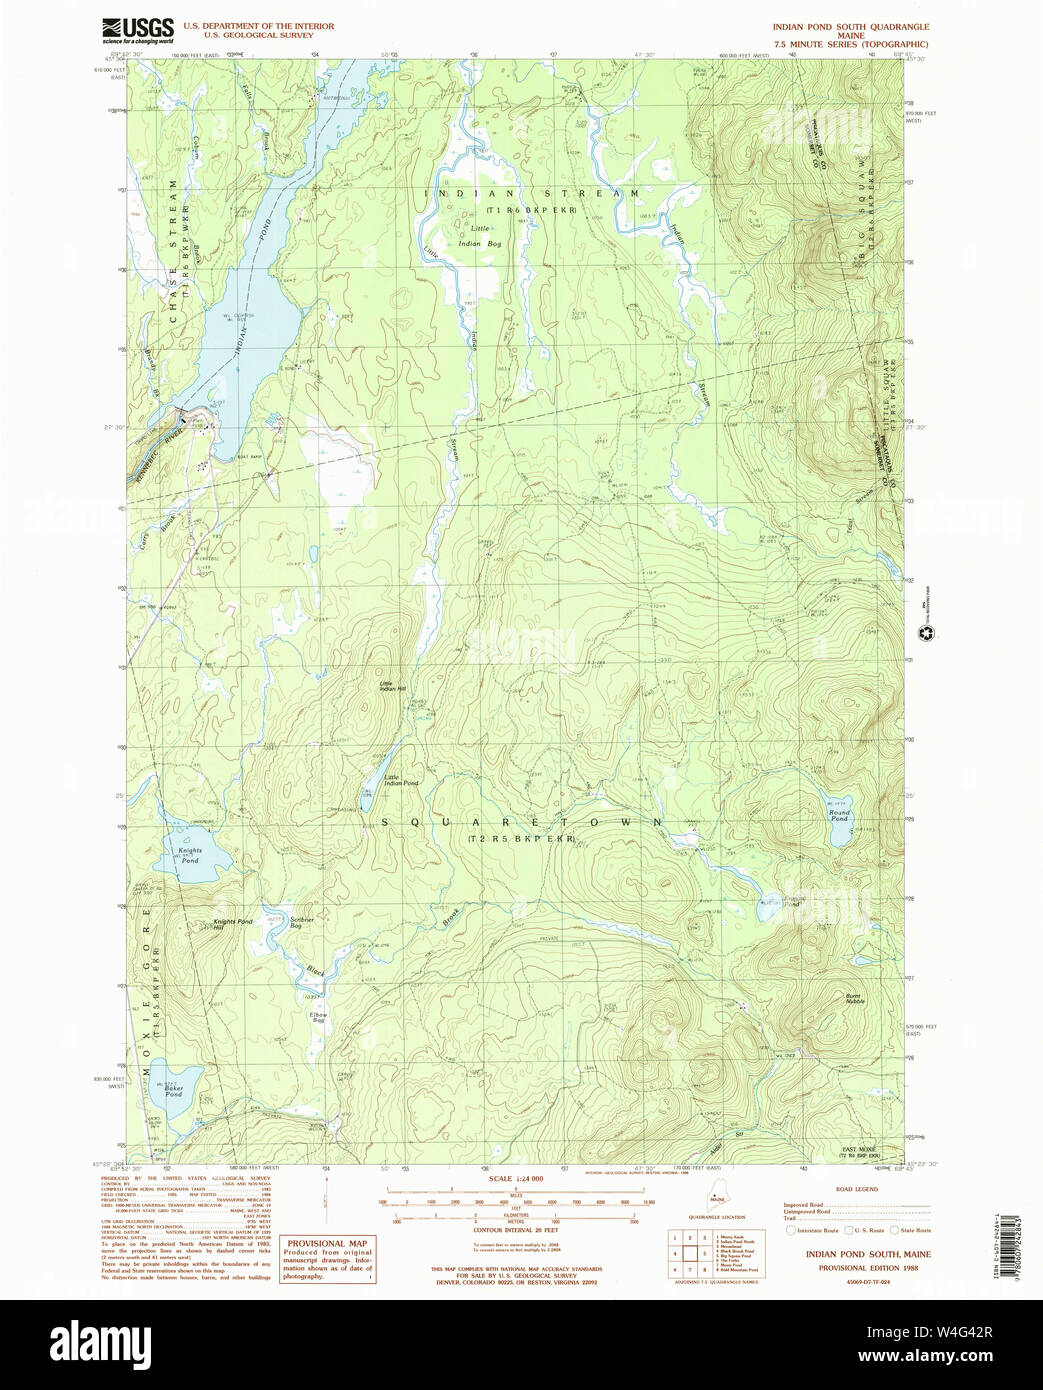 Maine USGS Historical Map Indian Pond South 105227 1988 24000 Restoration Stock Photo